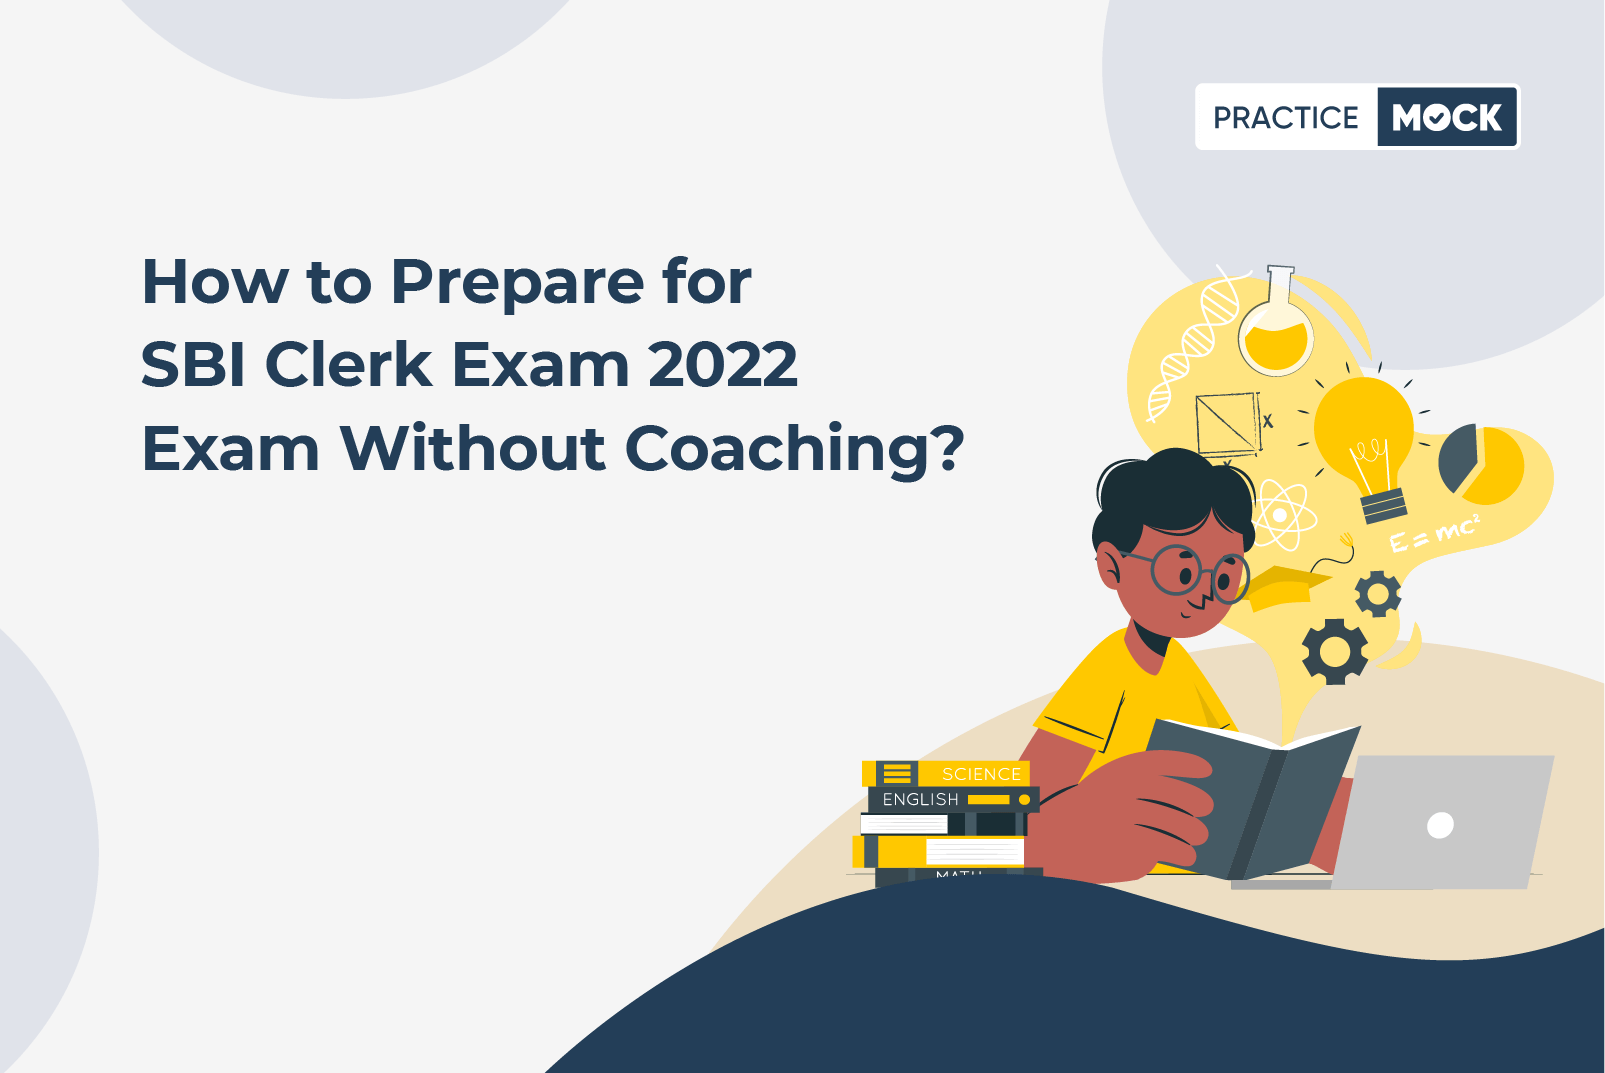 How to Prepare for SBI Clerk Exam 2022 Exam without Coaching?